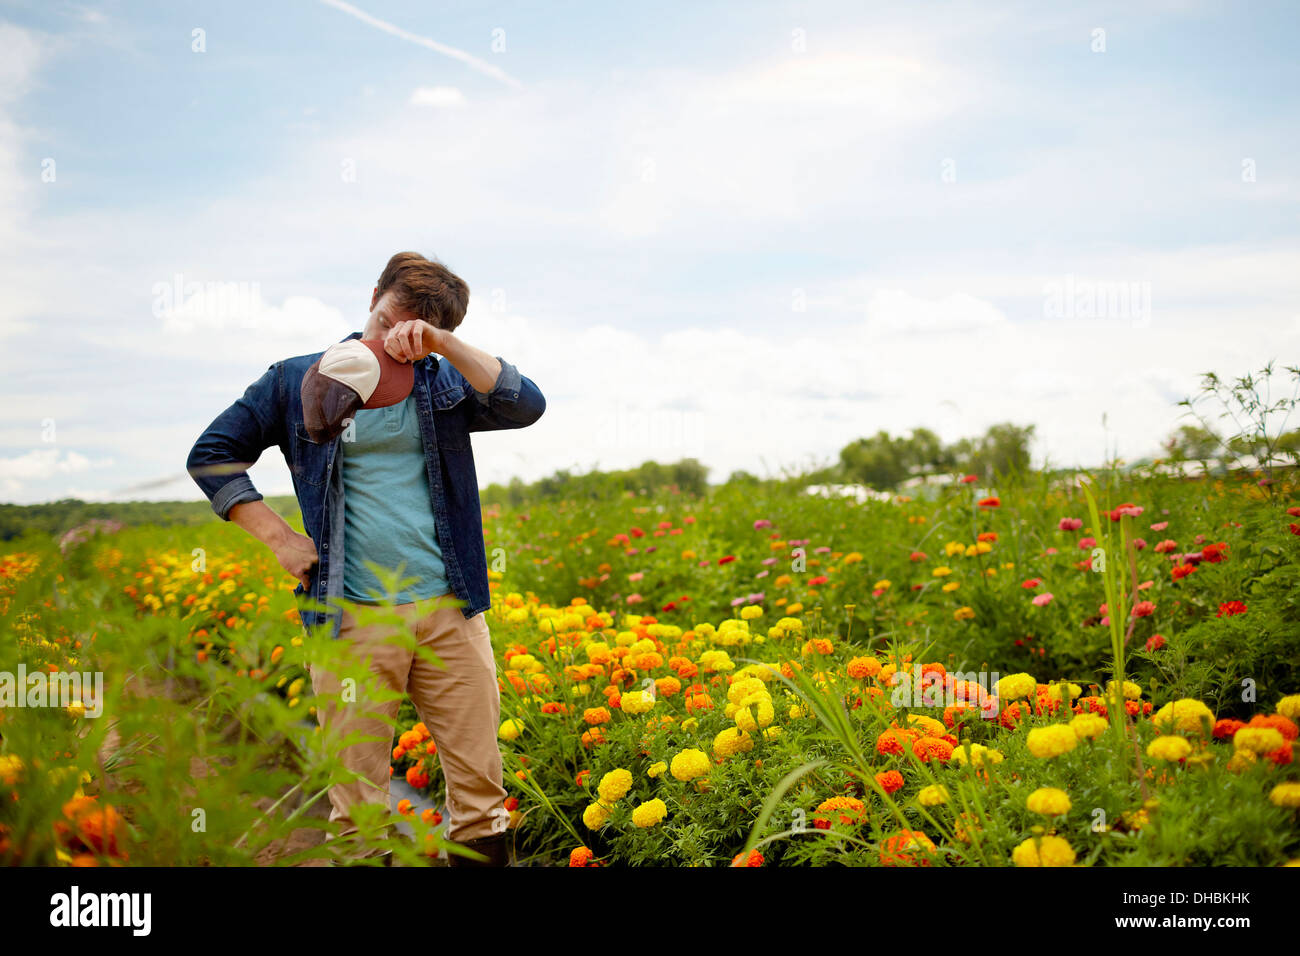 A farmer working in his fields in New York State. A yellow and orange organically grown flower crop. Stock Photo